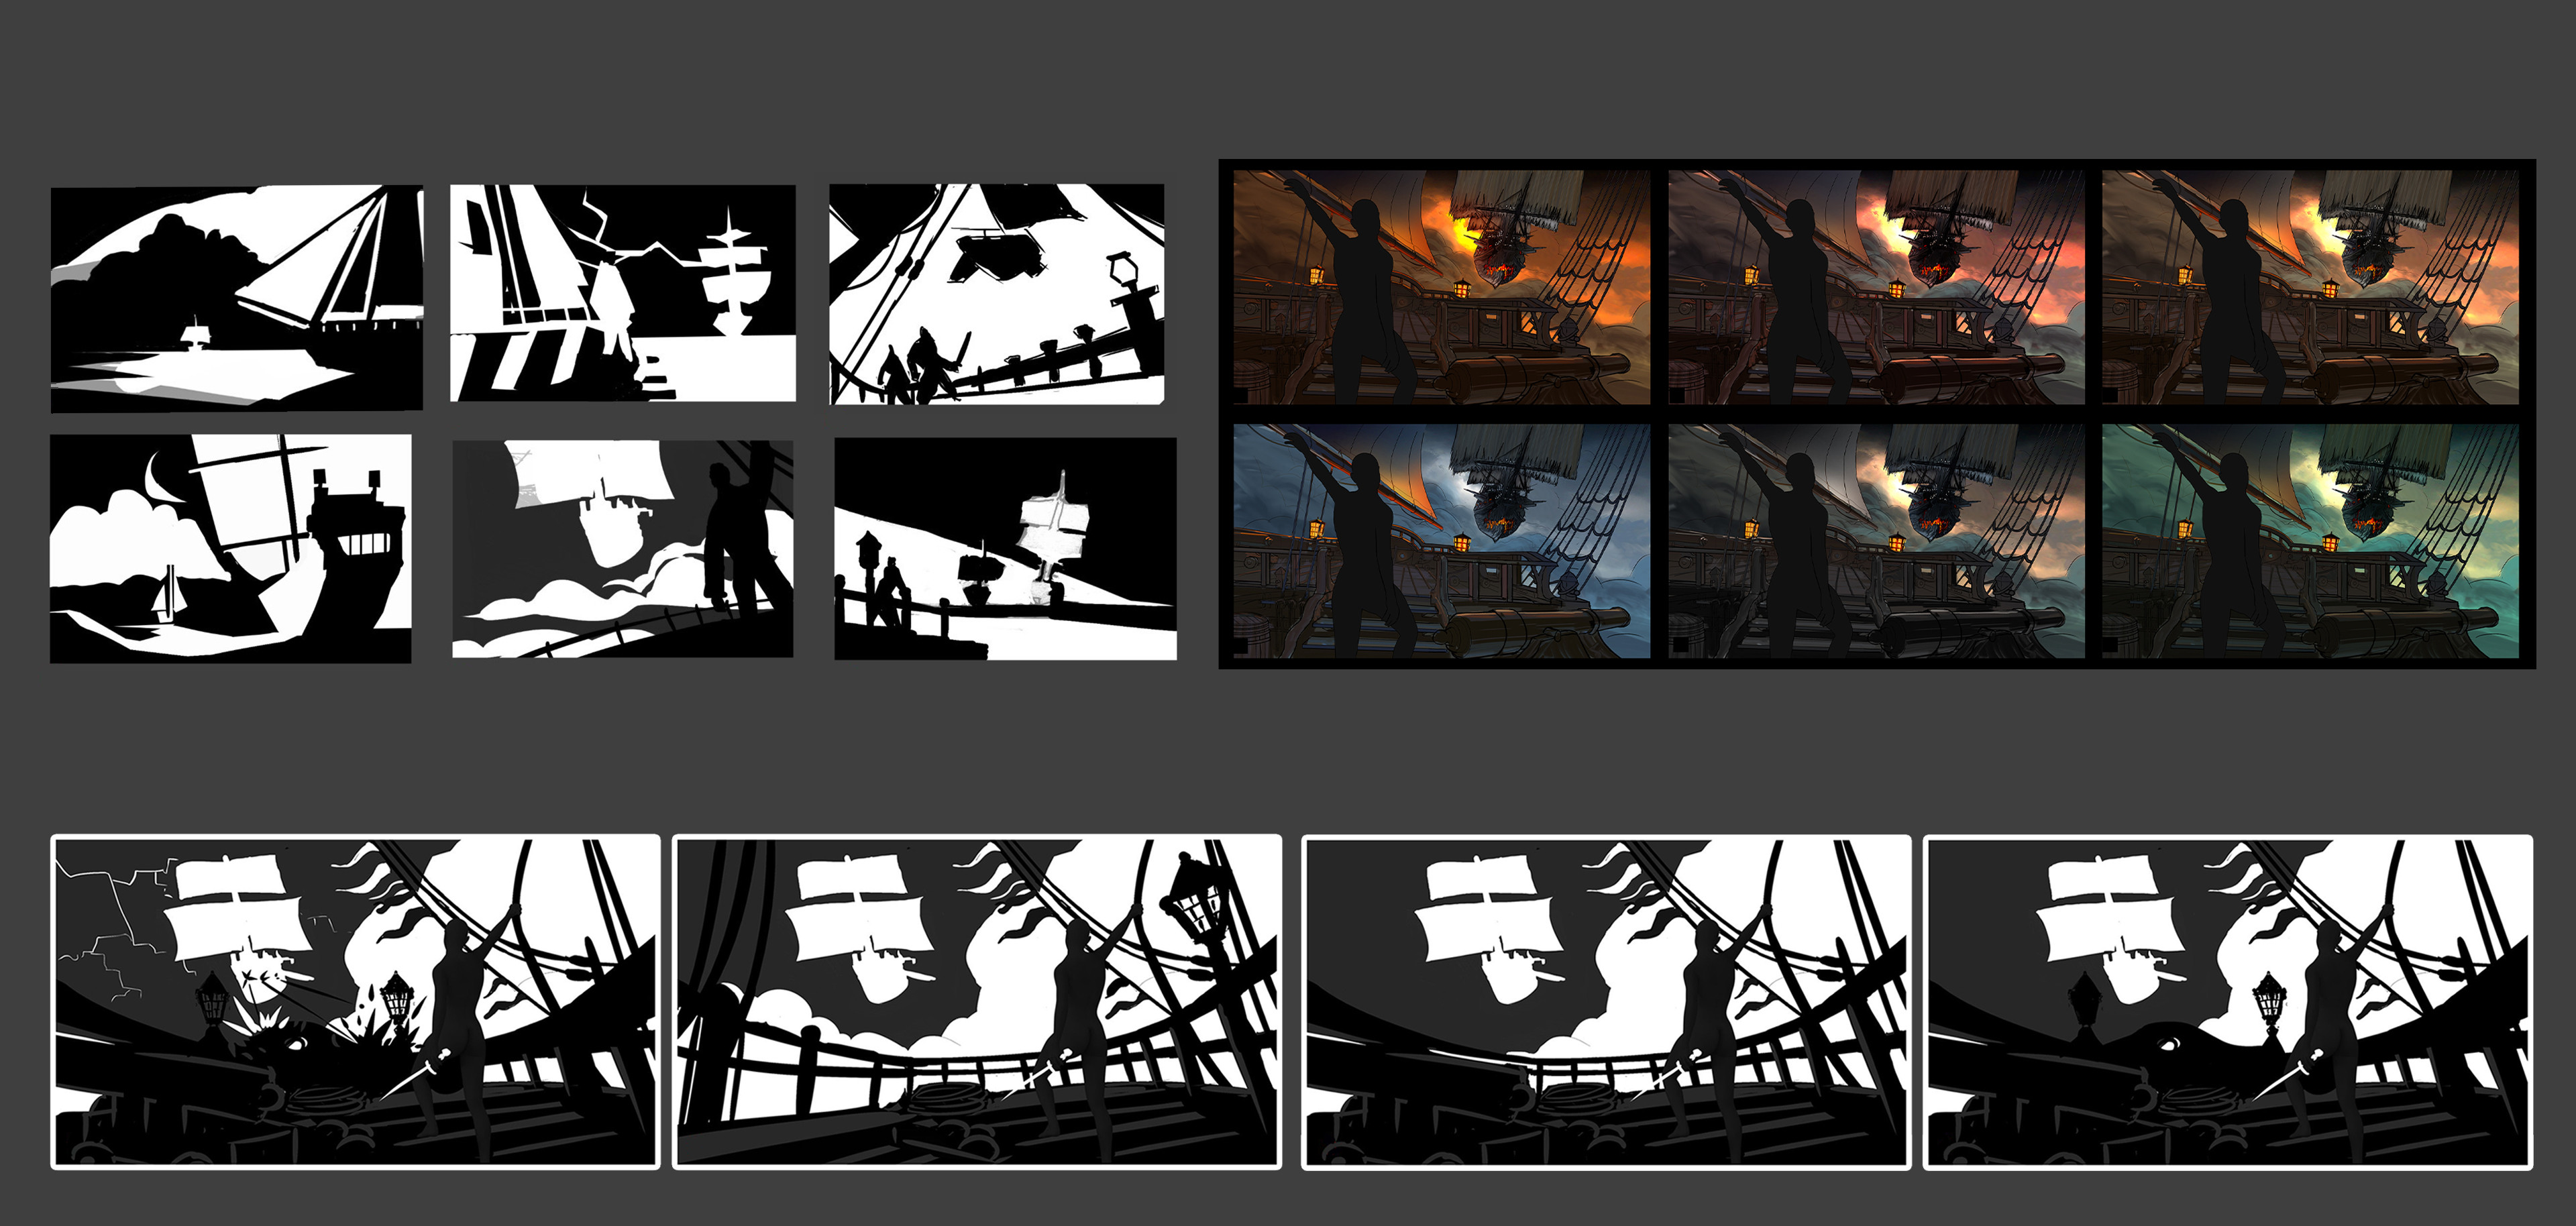 Early composition exploration, as well as rough color sketches